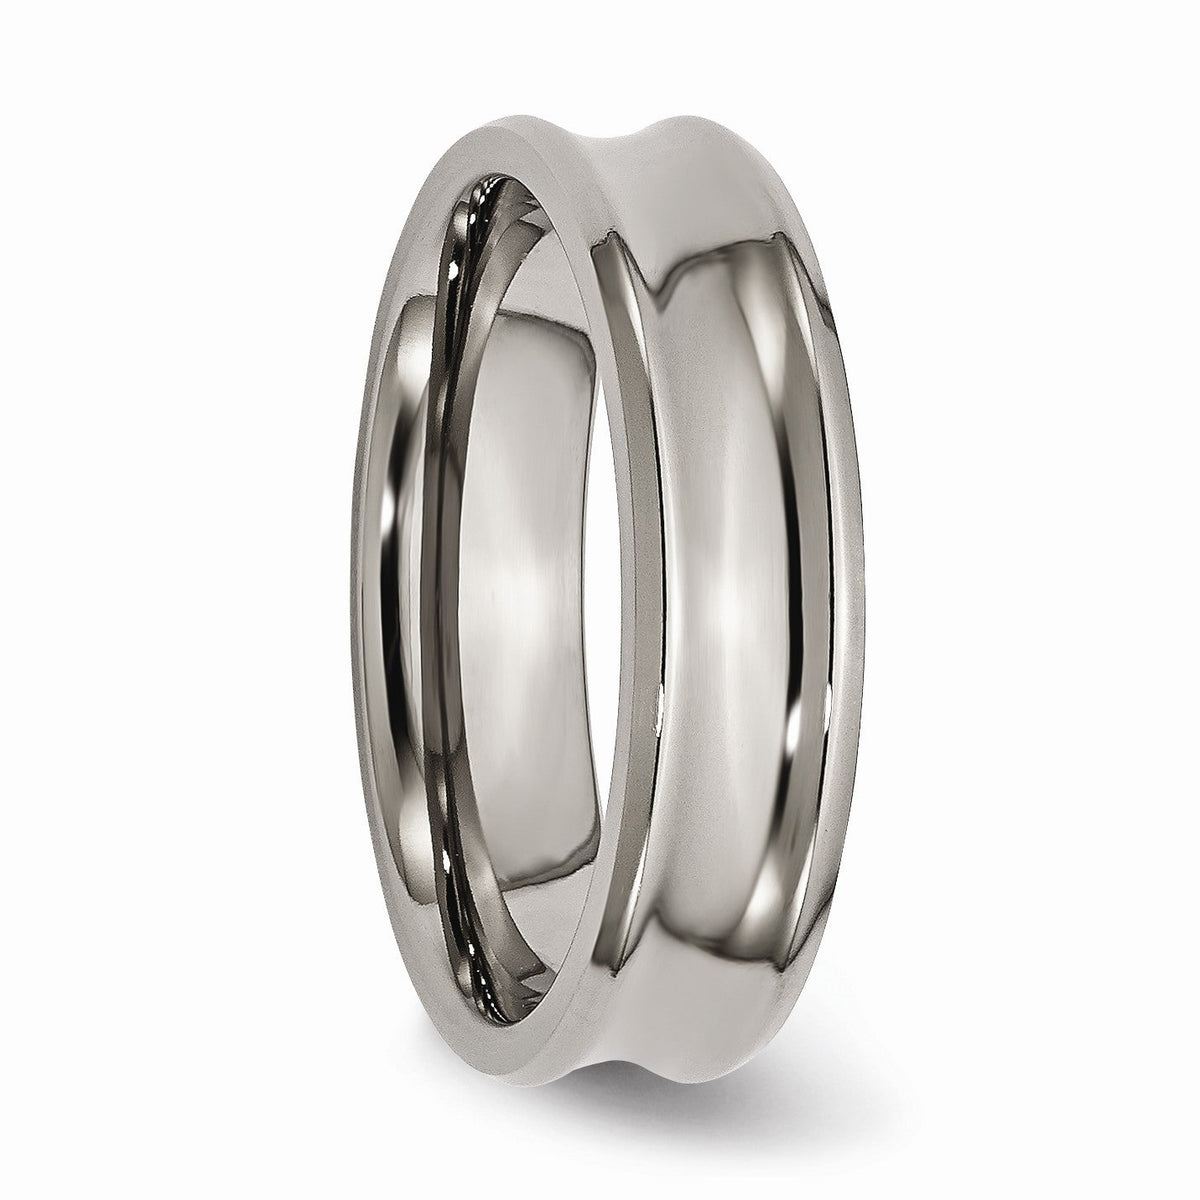 Alternate view of the Titanium 6mm Polished Concave and Beveled Edge Band by The Black Bow Jewelry Co.